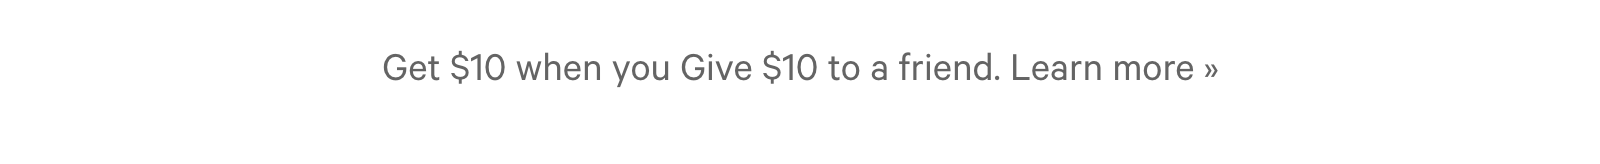 Get $10, Give $10 ?